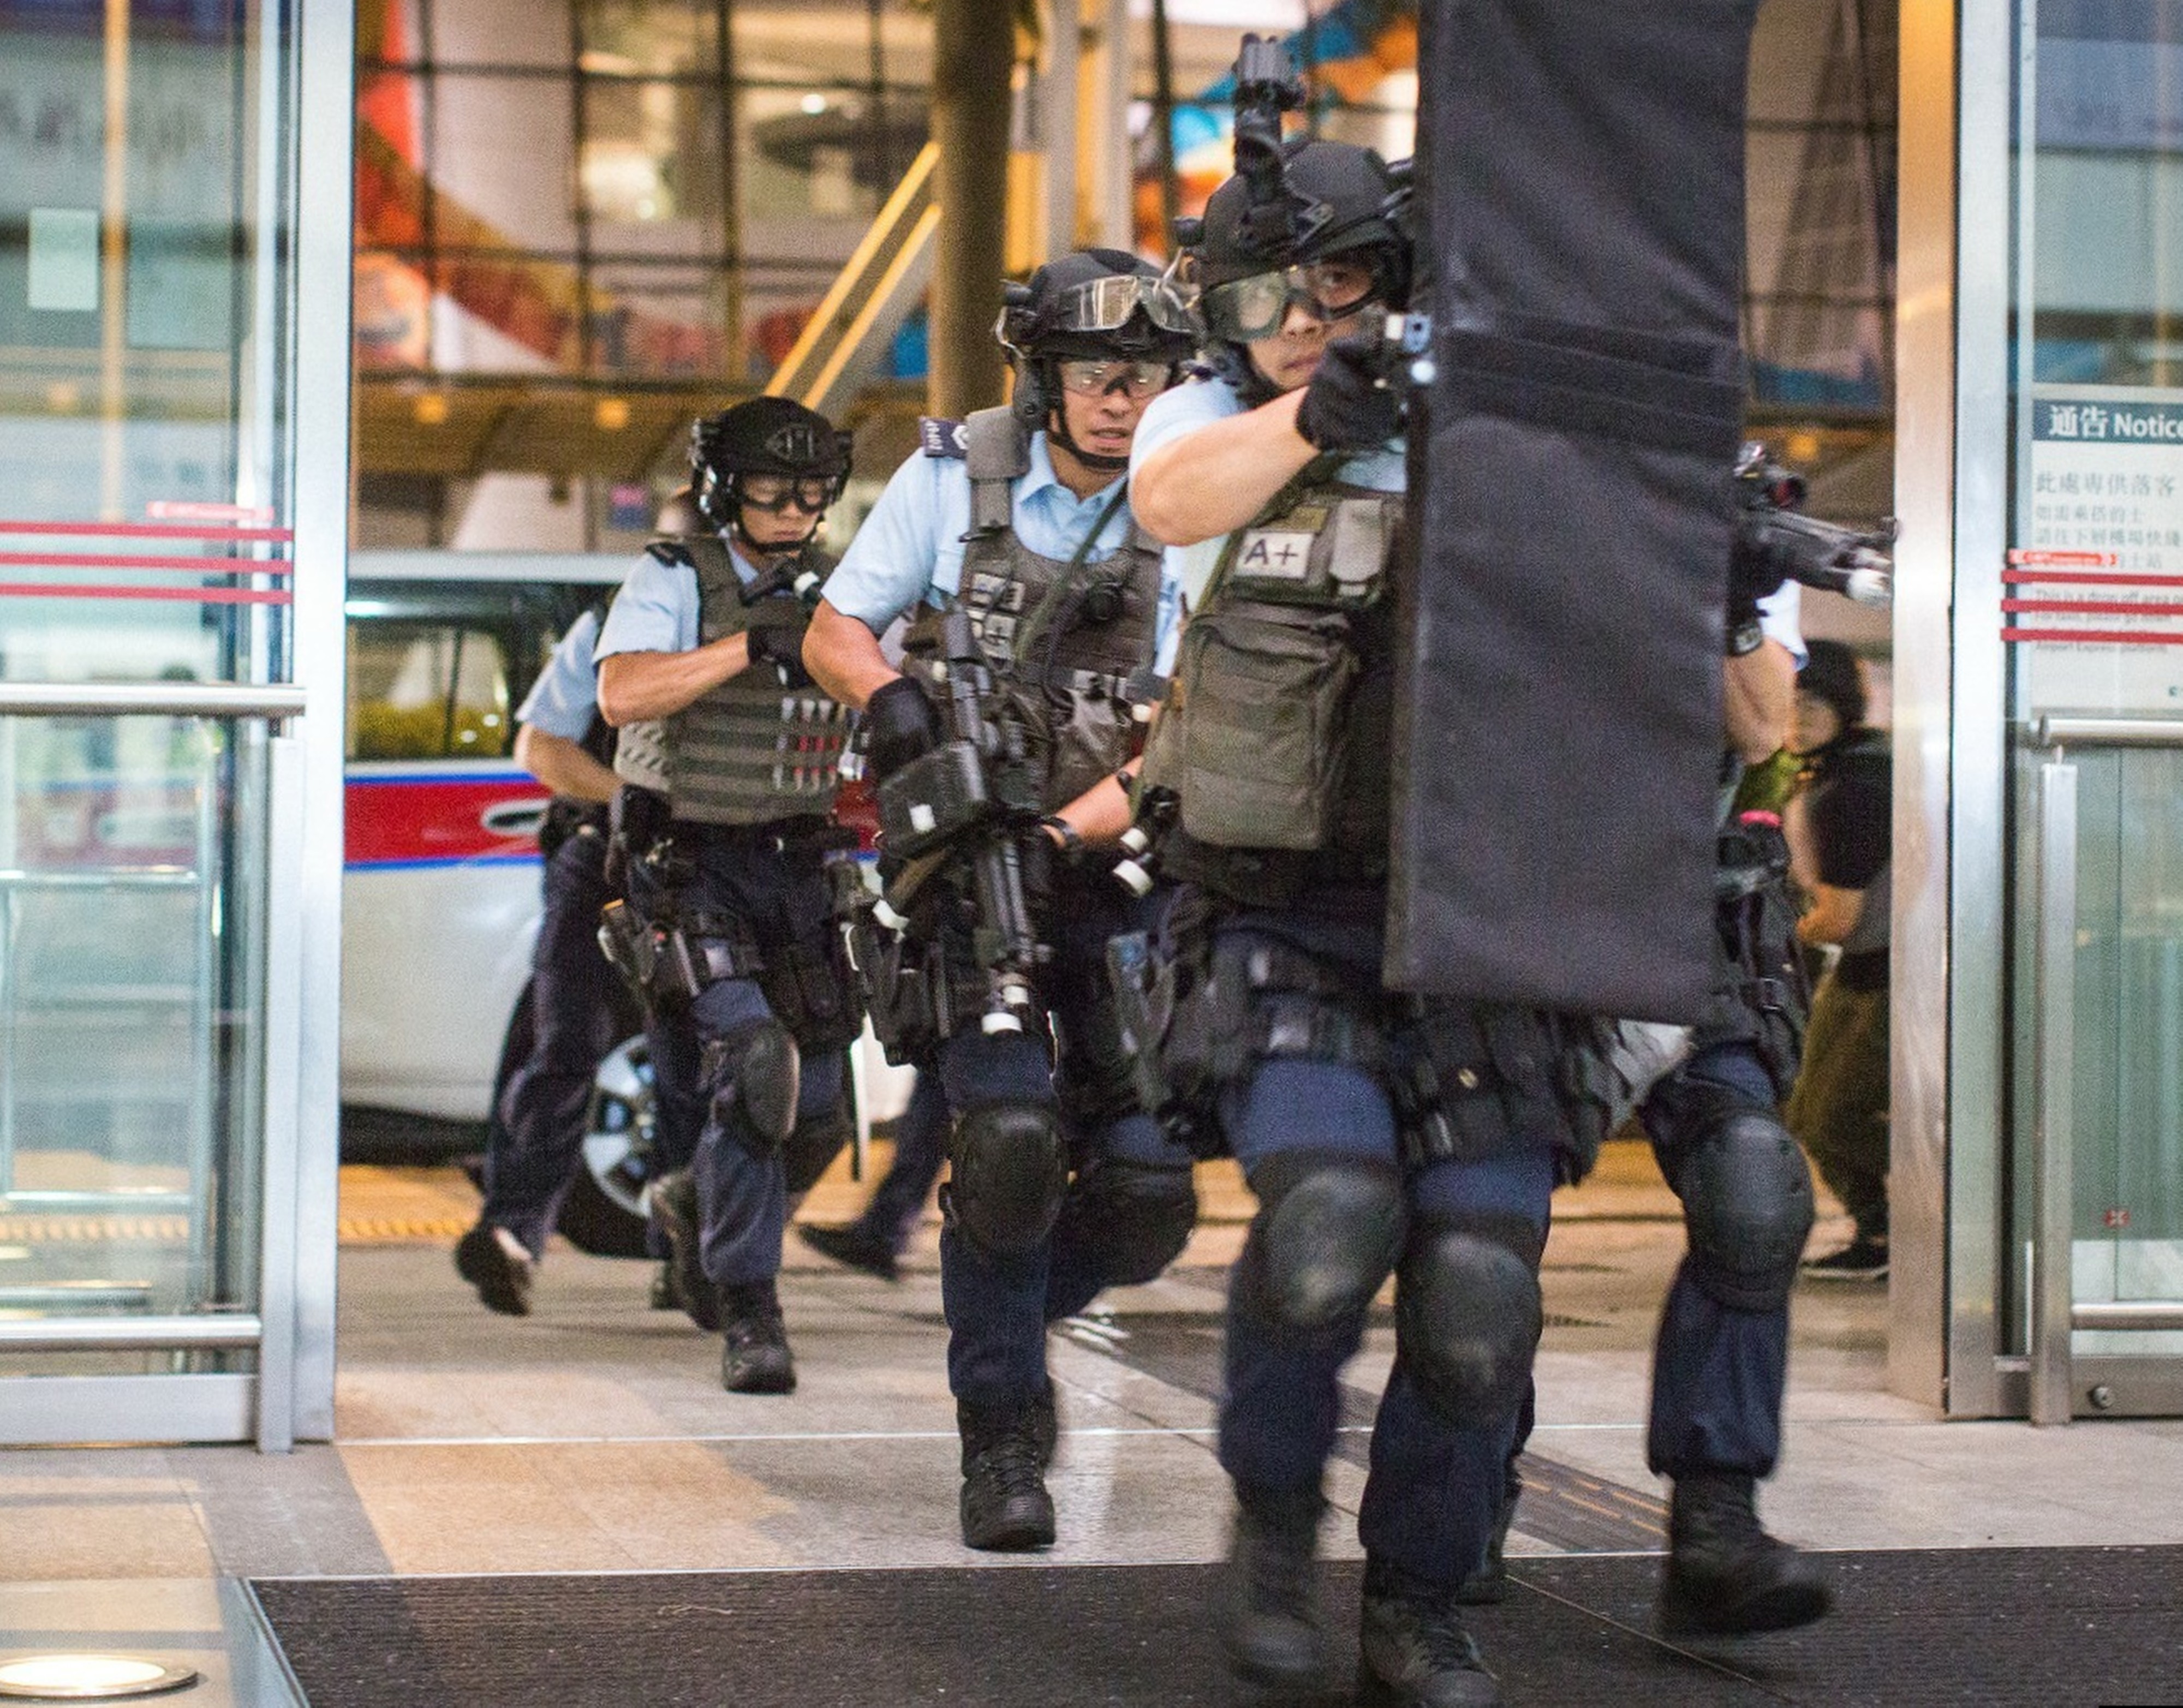 Hong Kong Police conduct an anti-terrorism drill in Central MTR station. Photo: Handout